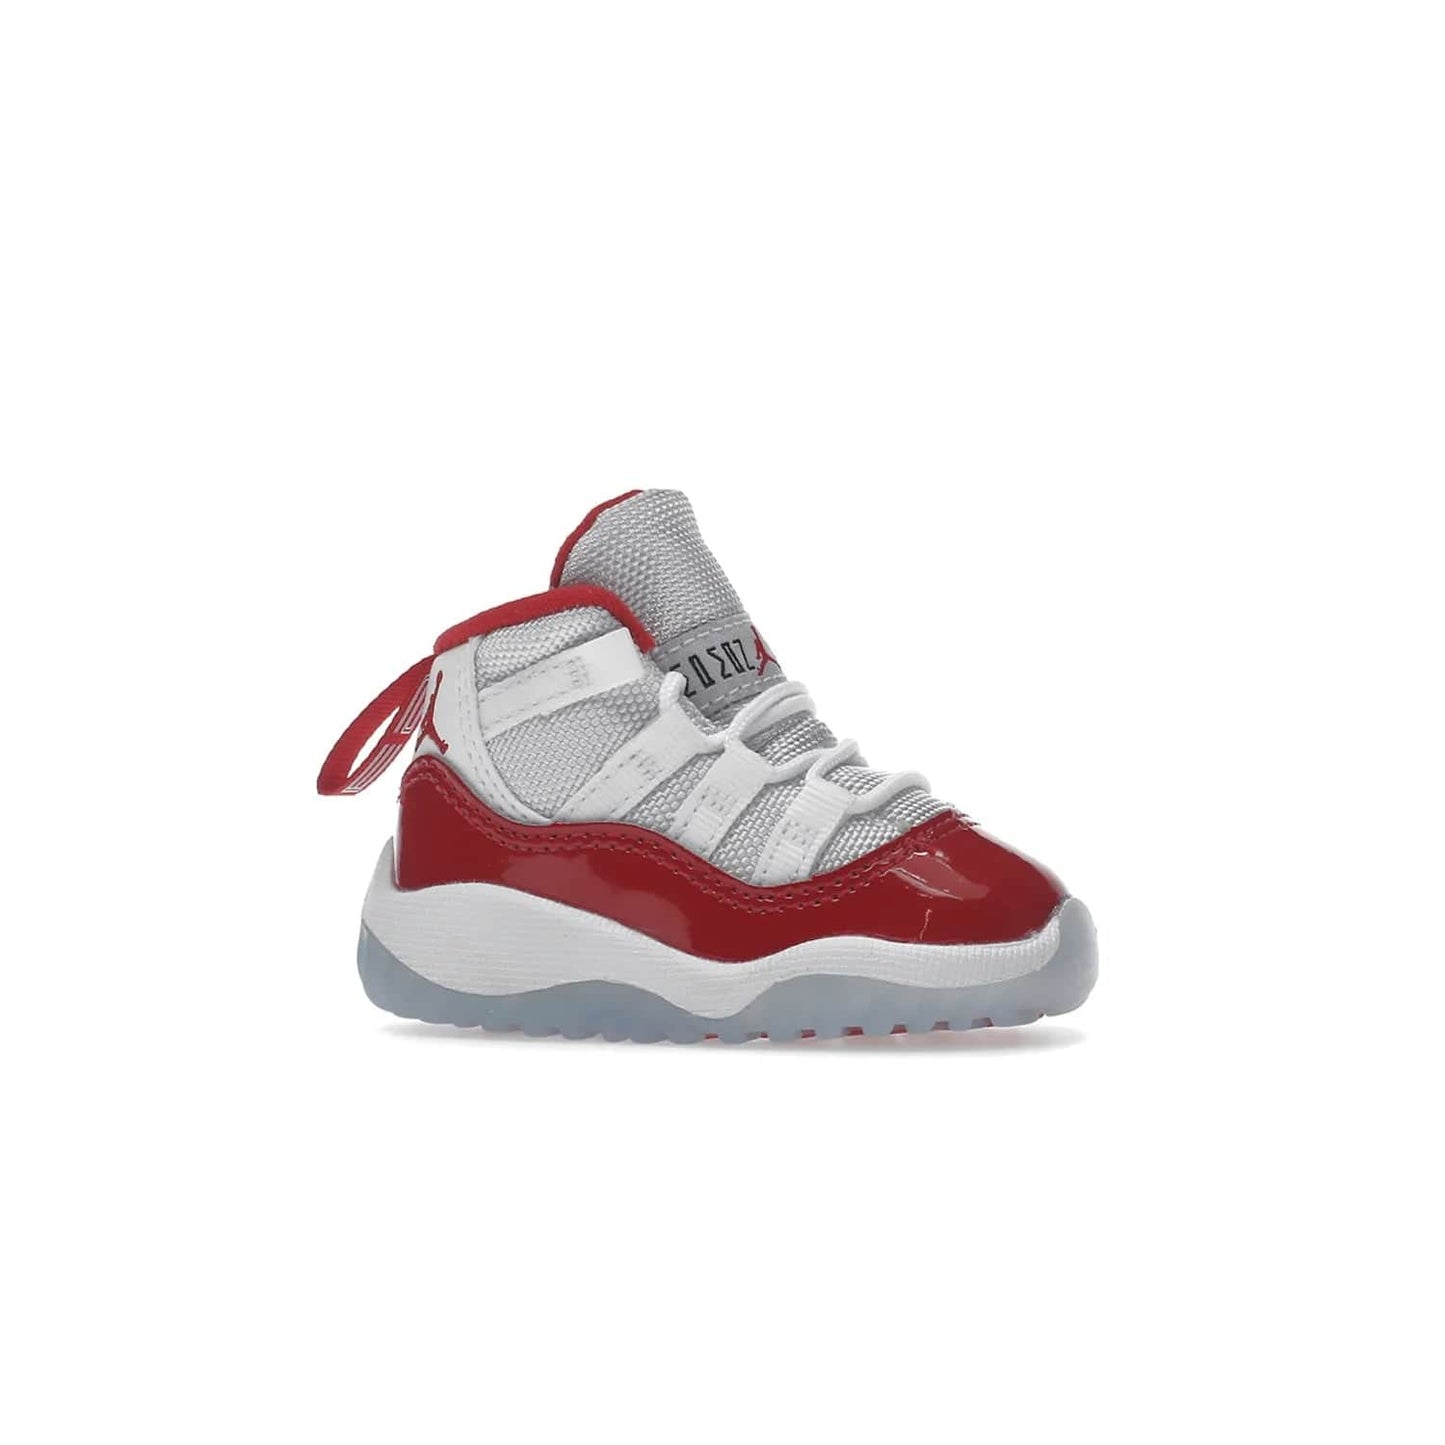 Jordan 11 Retro Cherry (2022) (TD) - Image 3 - Only at www.BallersClubKickz.com - Timeless classic. Air Jordan 11 Retro Cherry 2022 TD combines mesh, leather & suede for a unique look. White upper with varsity red suede. Jumpman logo on collar & tongue. Available Dec 10th, priced at $80.